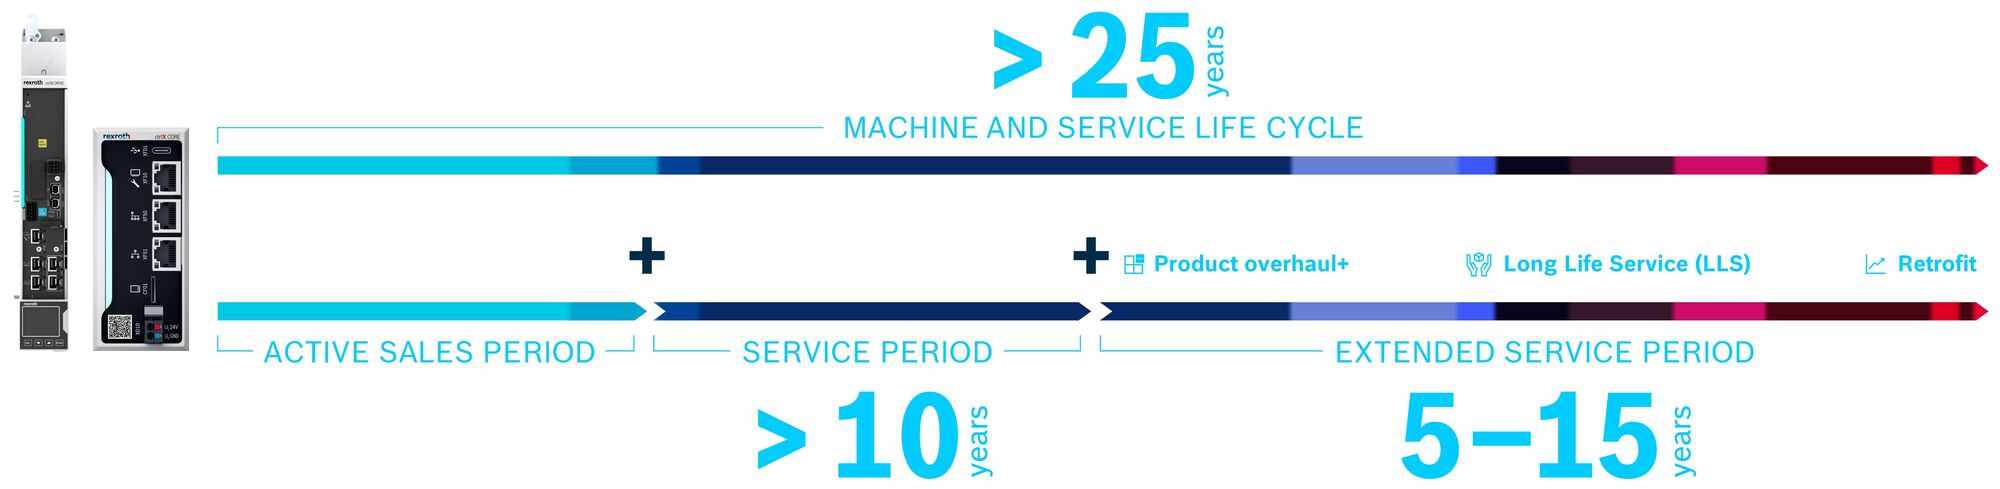 Graphic shows the product life cycle of Bosch Rexroth products and how this can be extended to 25 years through measures such as product overhaul, retrofit, and Long Life Service.